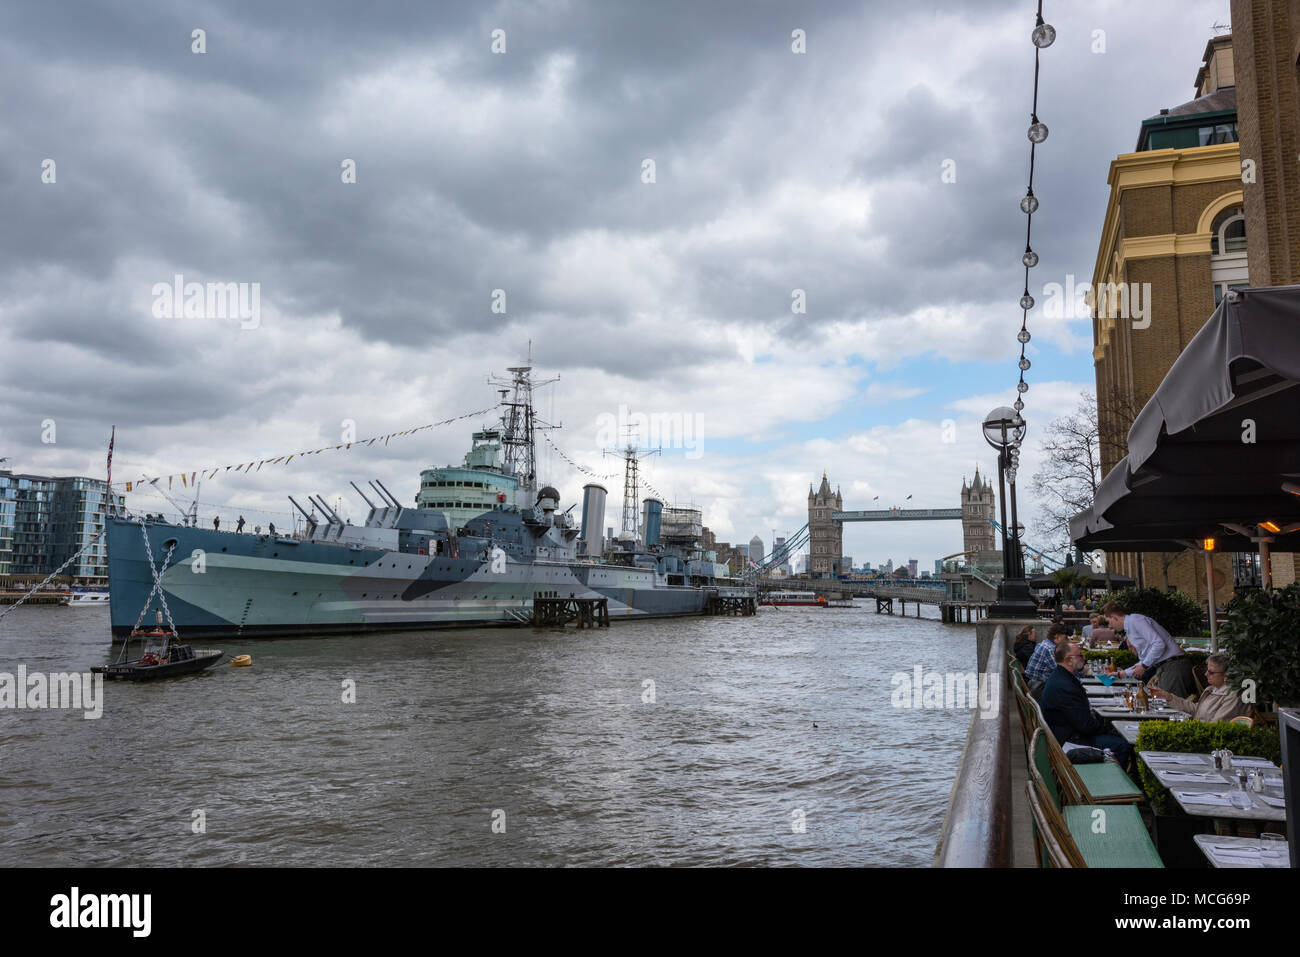 HMS Belfast alongside on the river thames in central london with people eating at a restaurant on the south bank riverside on a warm but overcast day. Stock Photo